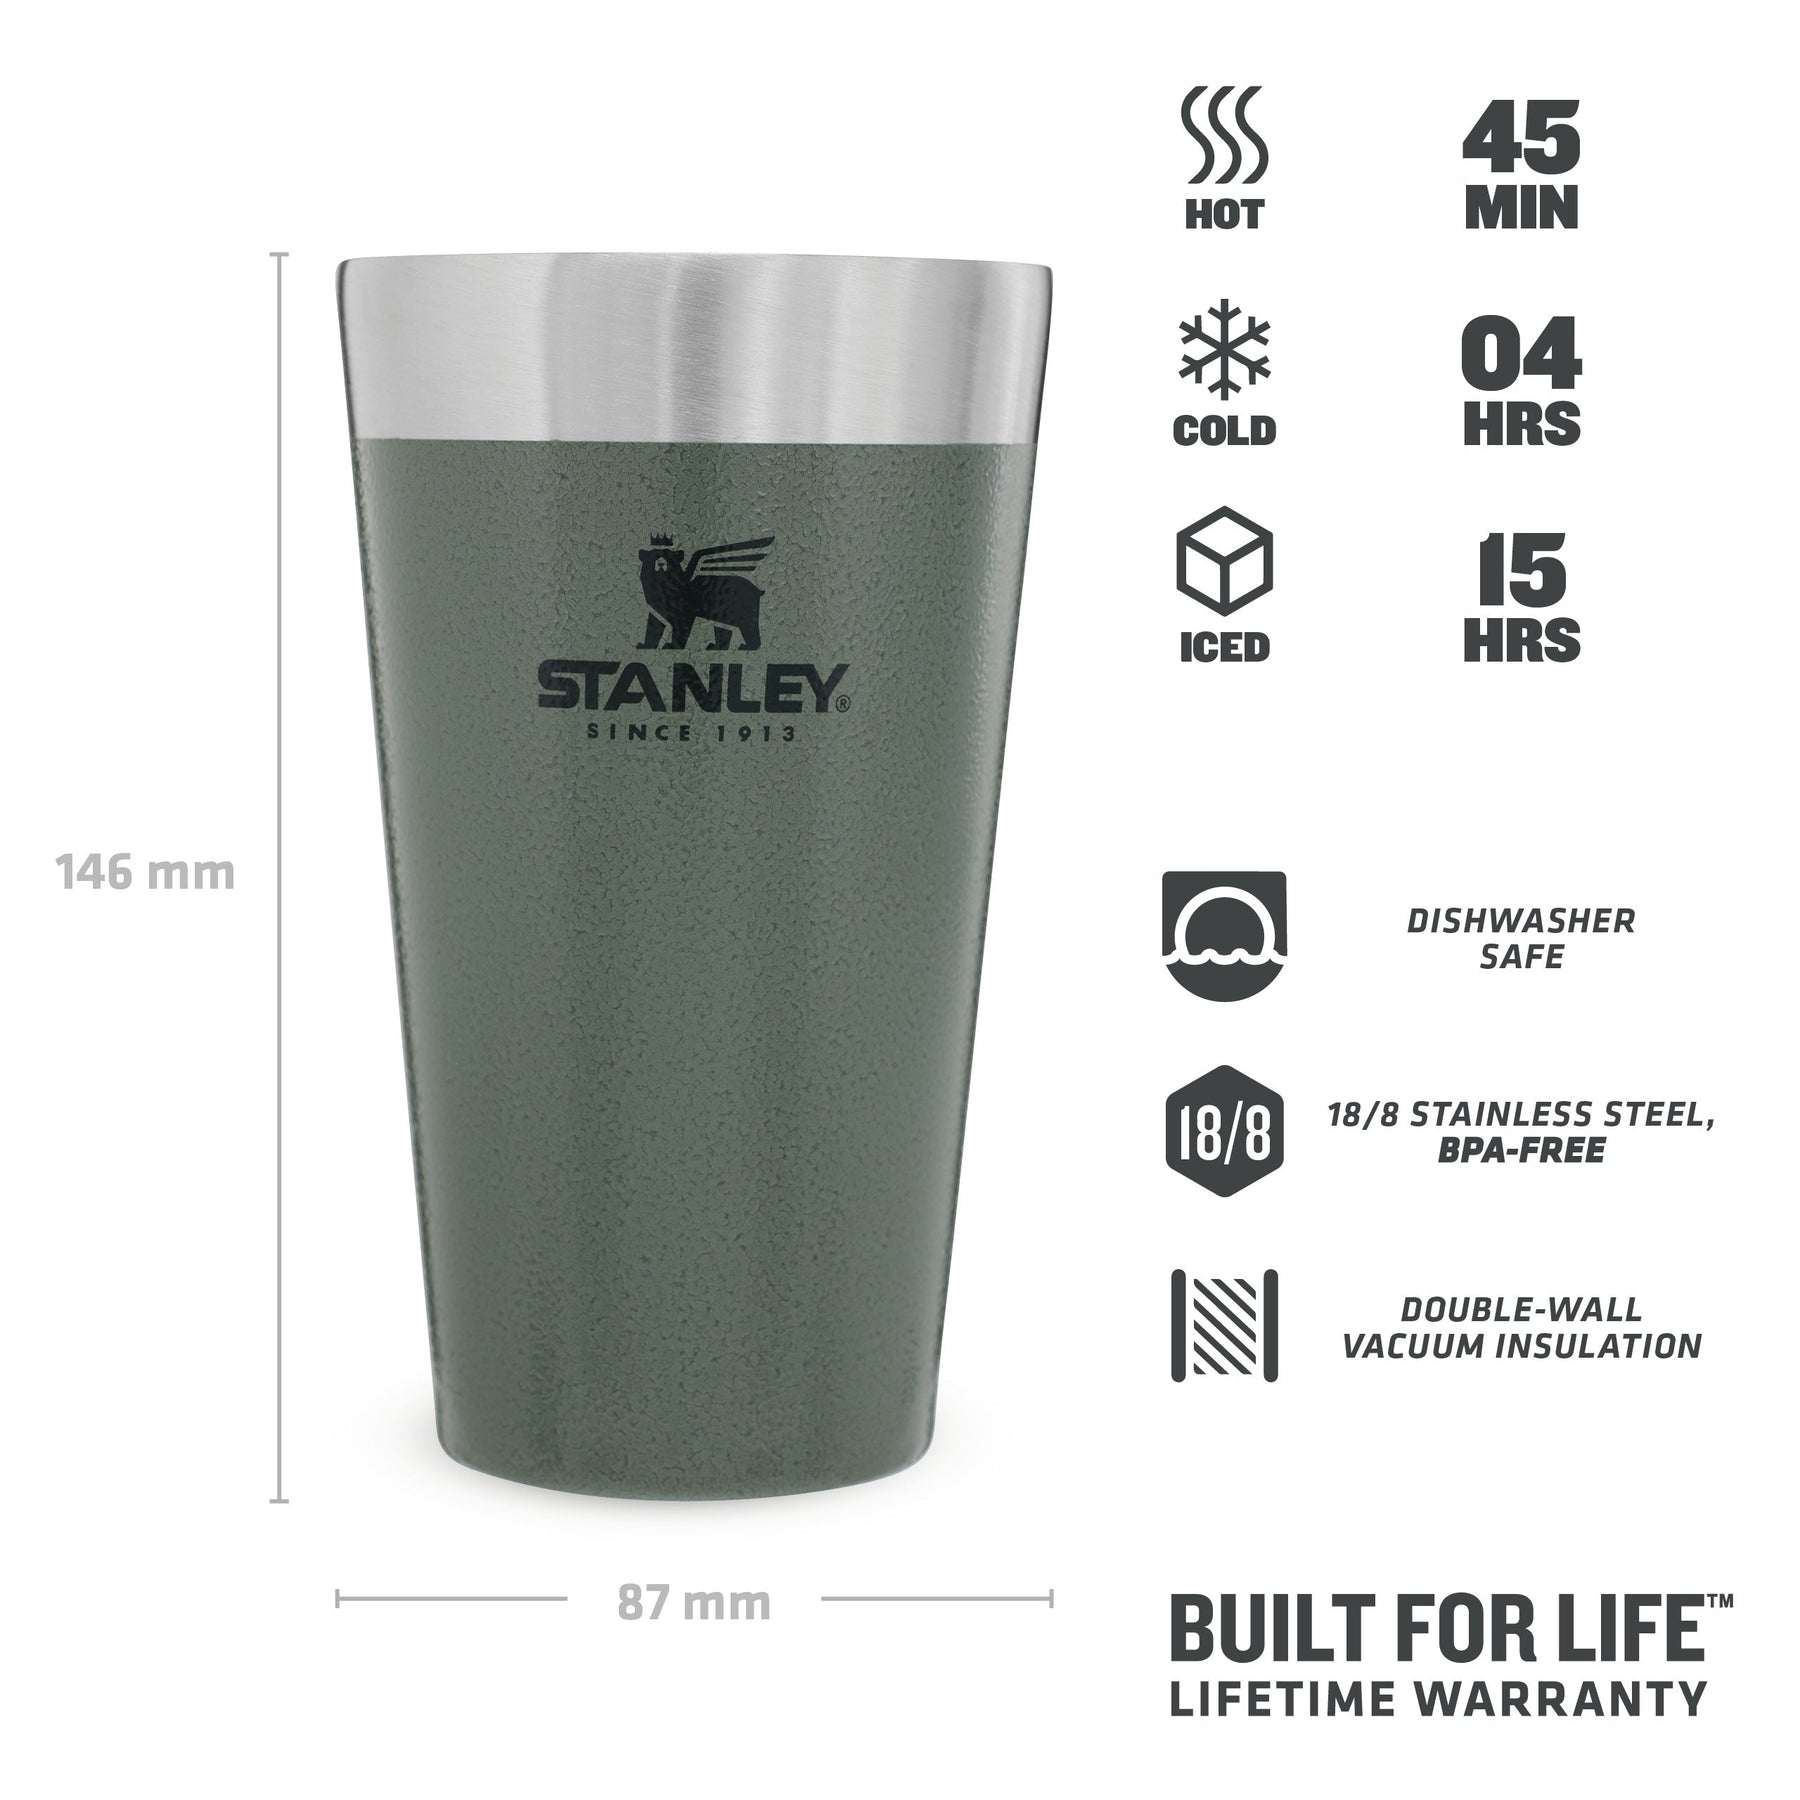 Introductory Offer vaso stanley 